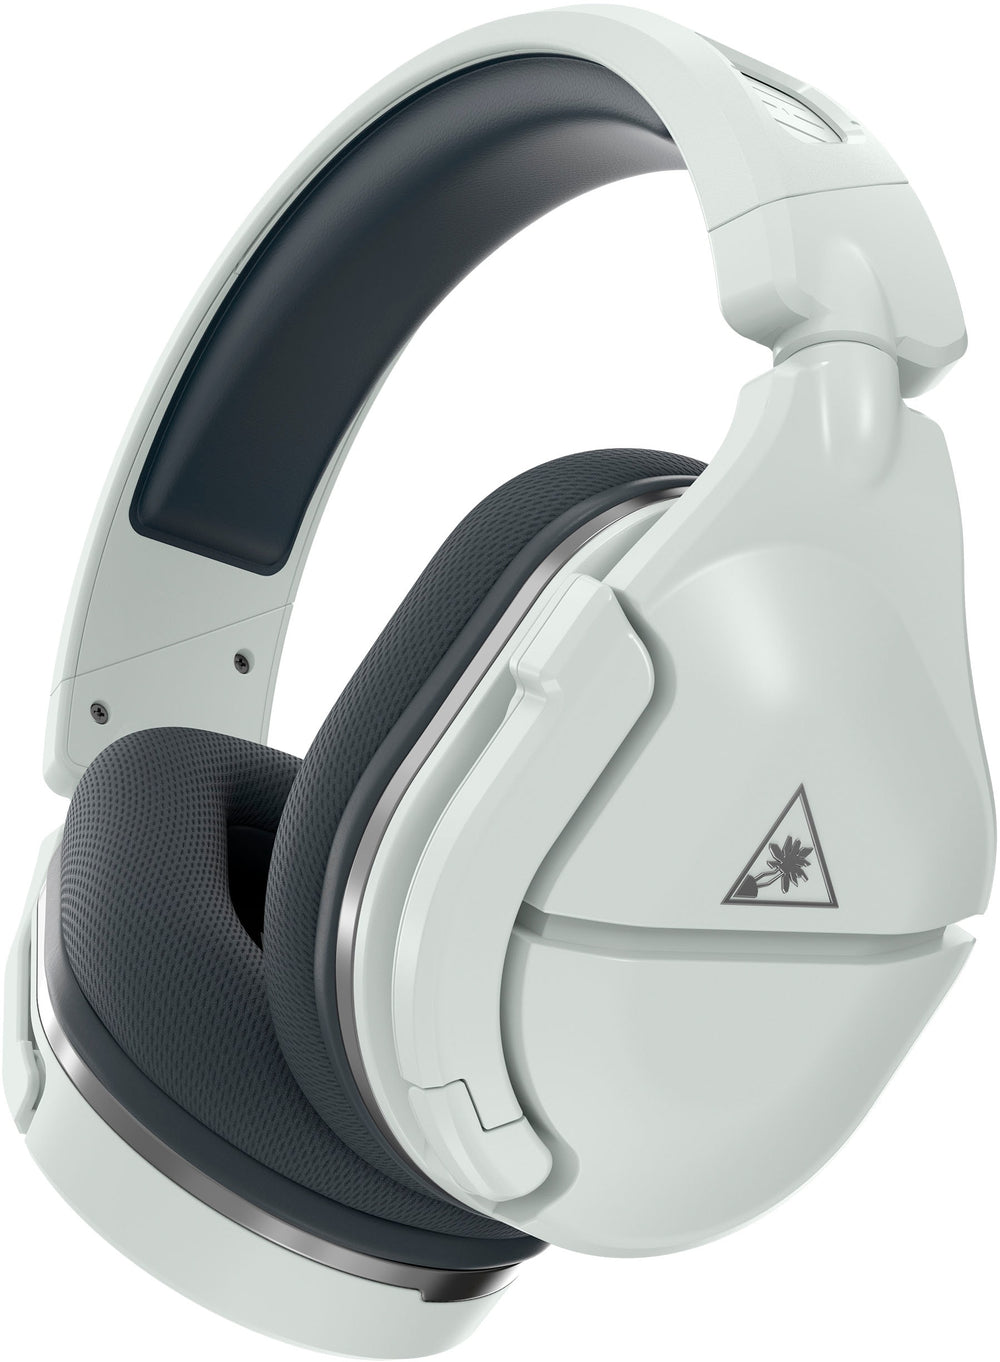 Turtle Beach - Stealth 600 Gen 2 USB PS Wireless Amplified Gaming Headset for PS5, PS4 & PS4 Pro - 24 Hour Battery - White_1